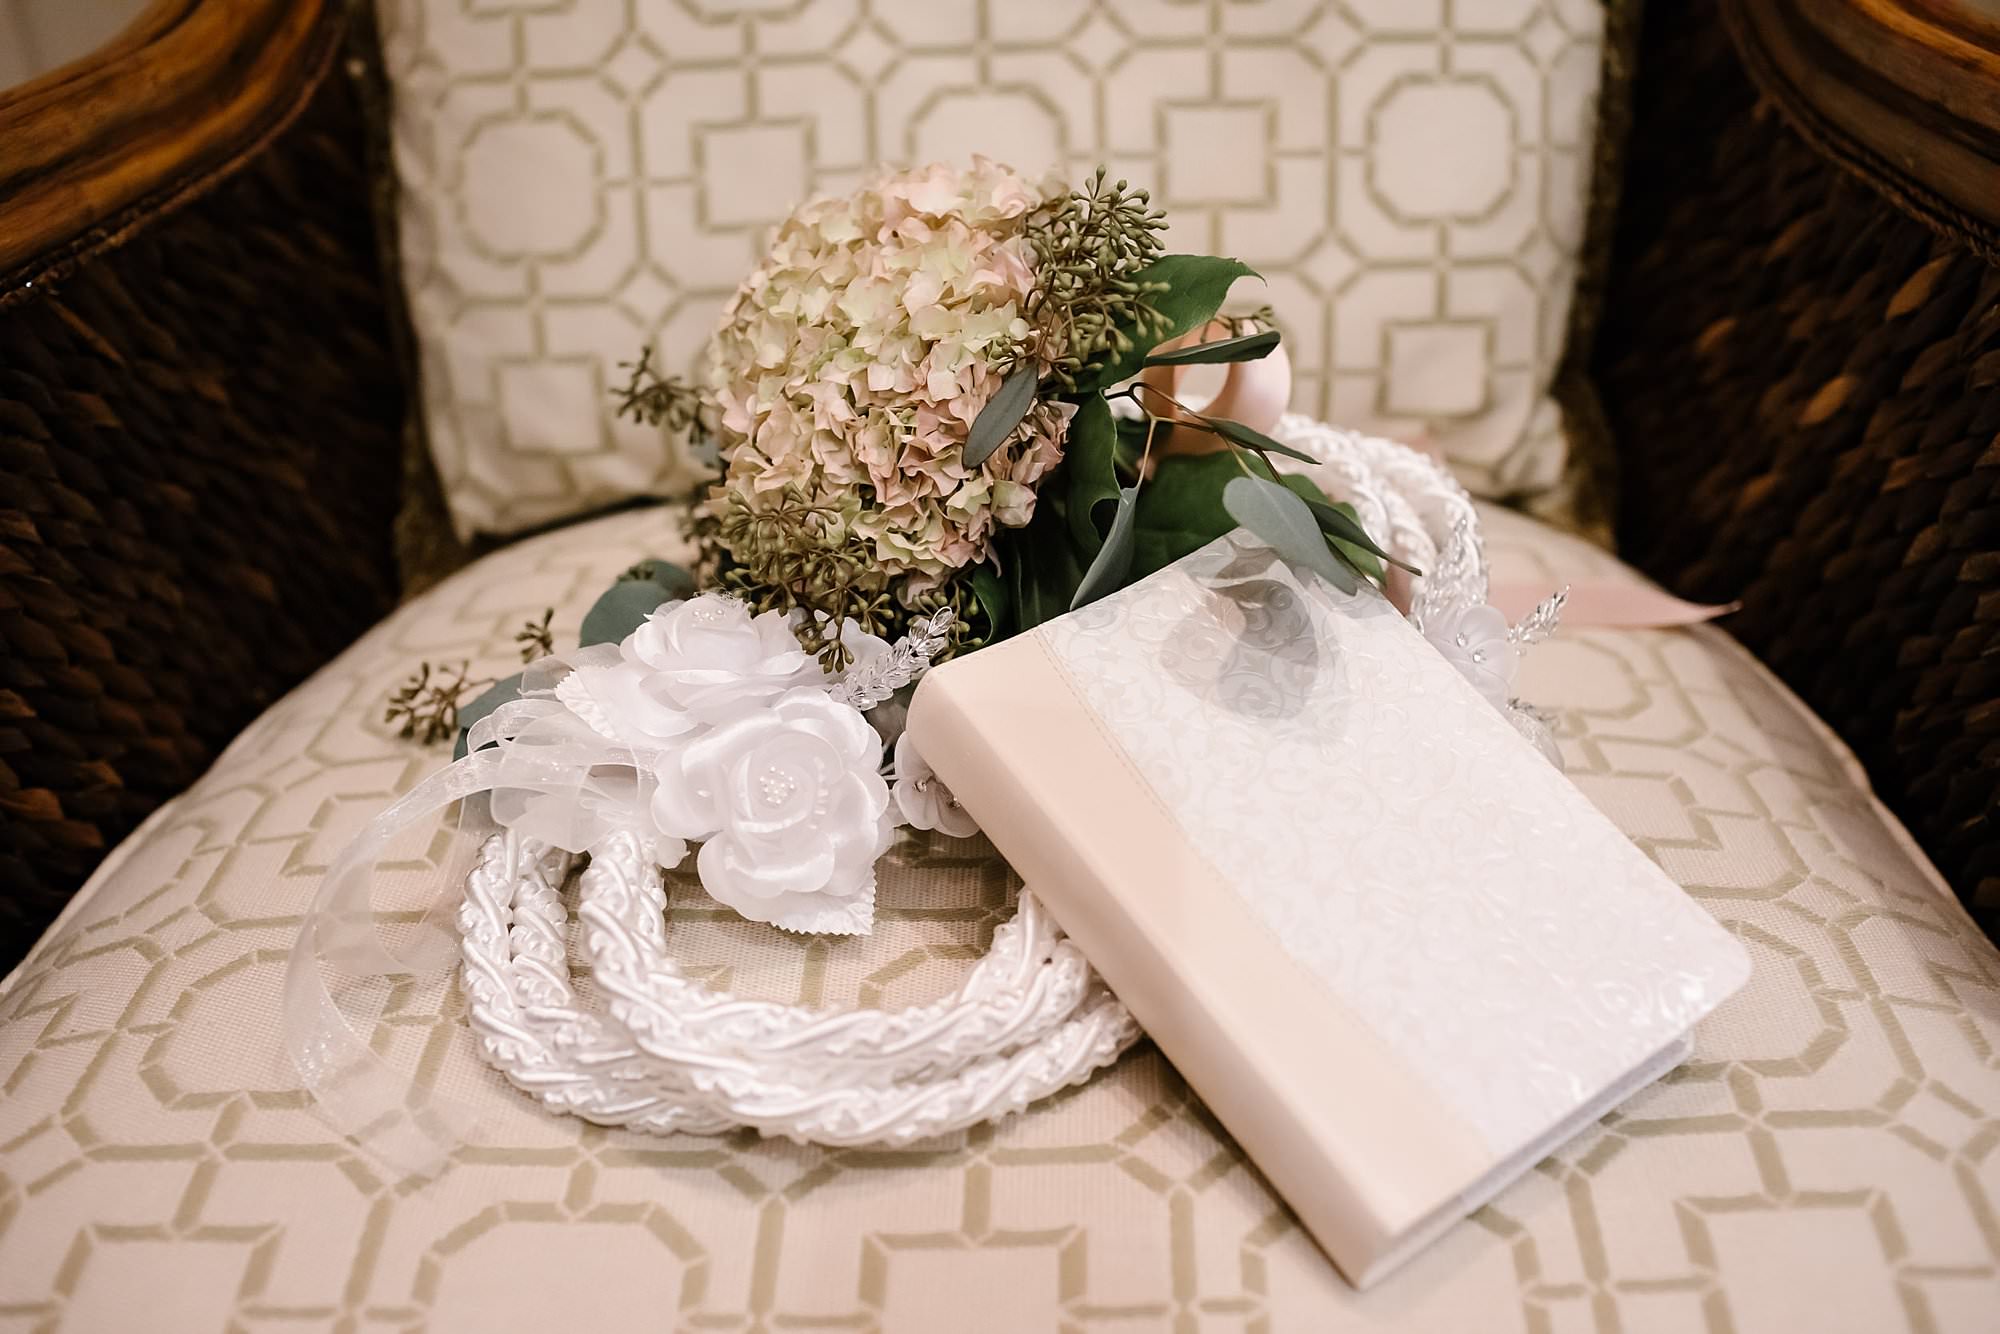 Detail photo of bridesmaid bouquet of hydrangea and seeded eucalyptus , white lasso and wedding bible